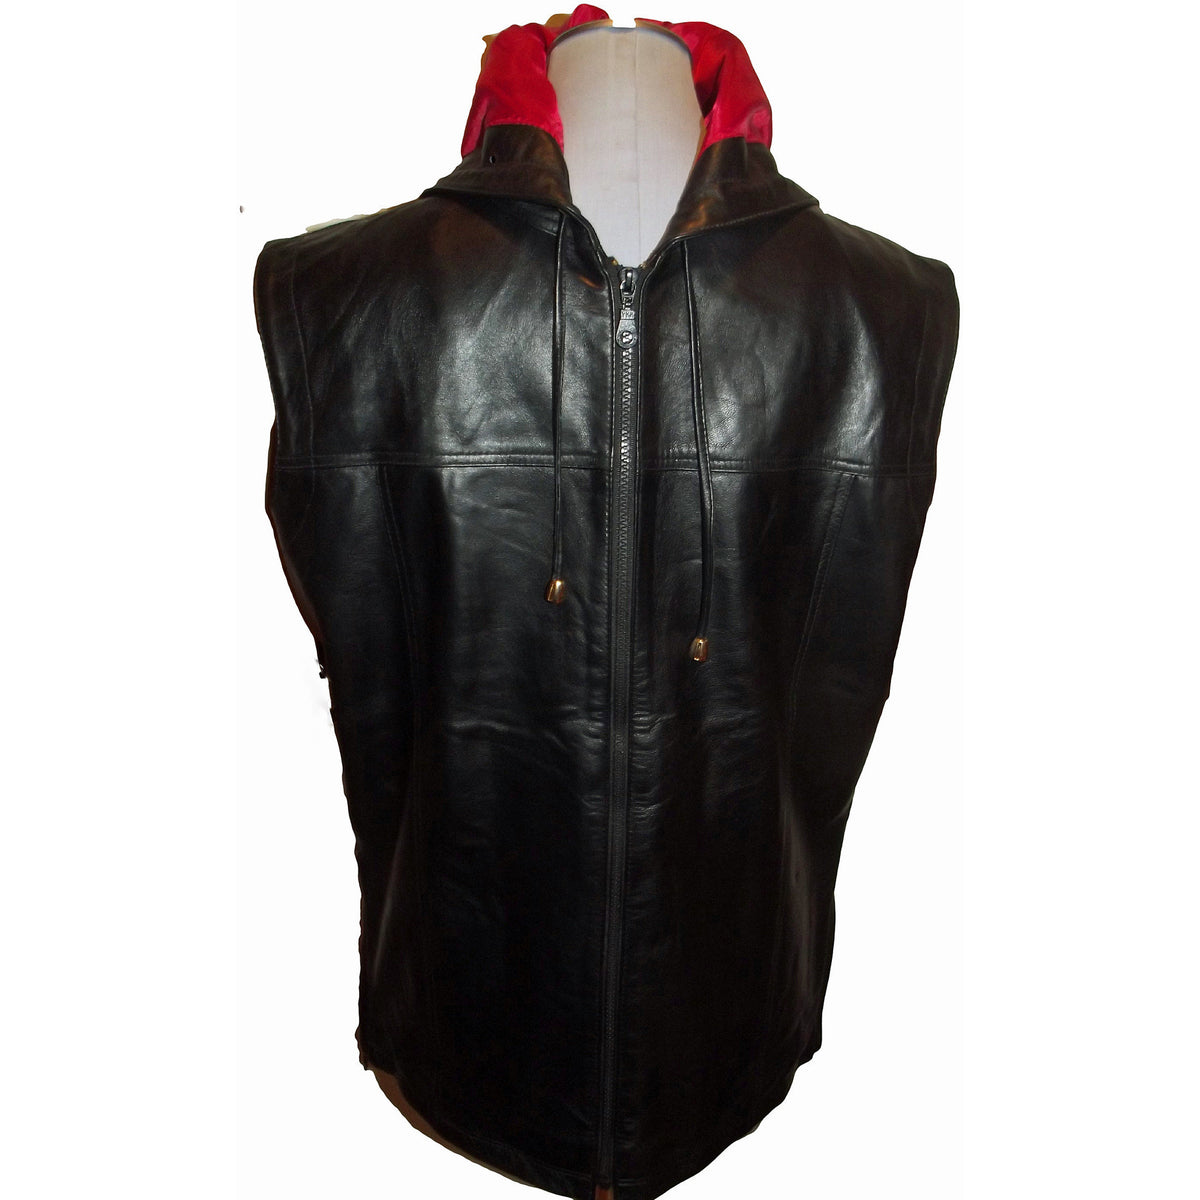 Womens Unisex Black Leather Hooded Hoodie Zip up Sleeveless Tee Shirt / Vest Nappa Sheepskin Size Small only